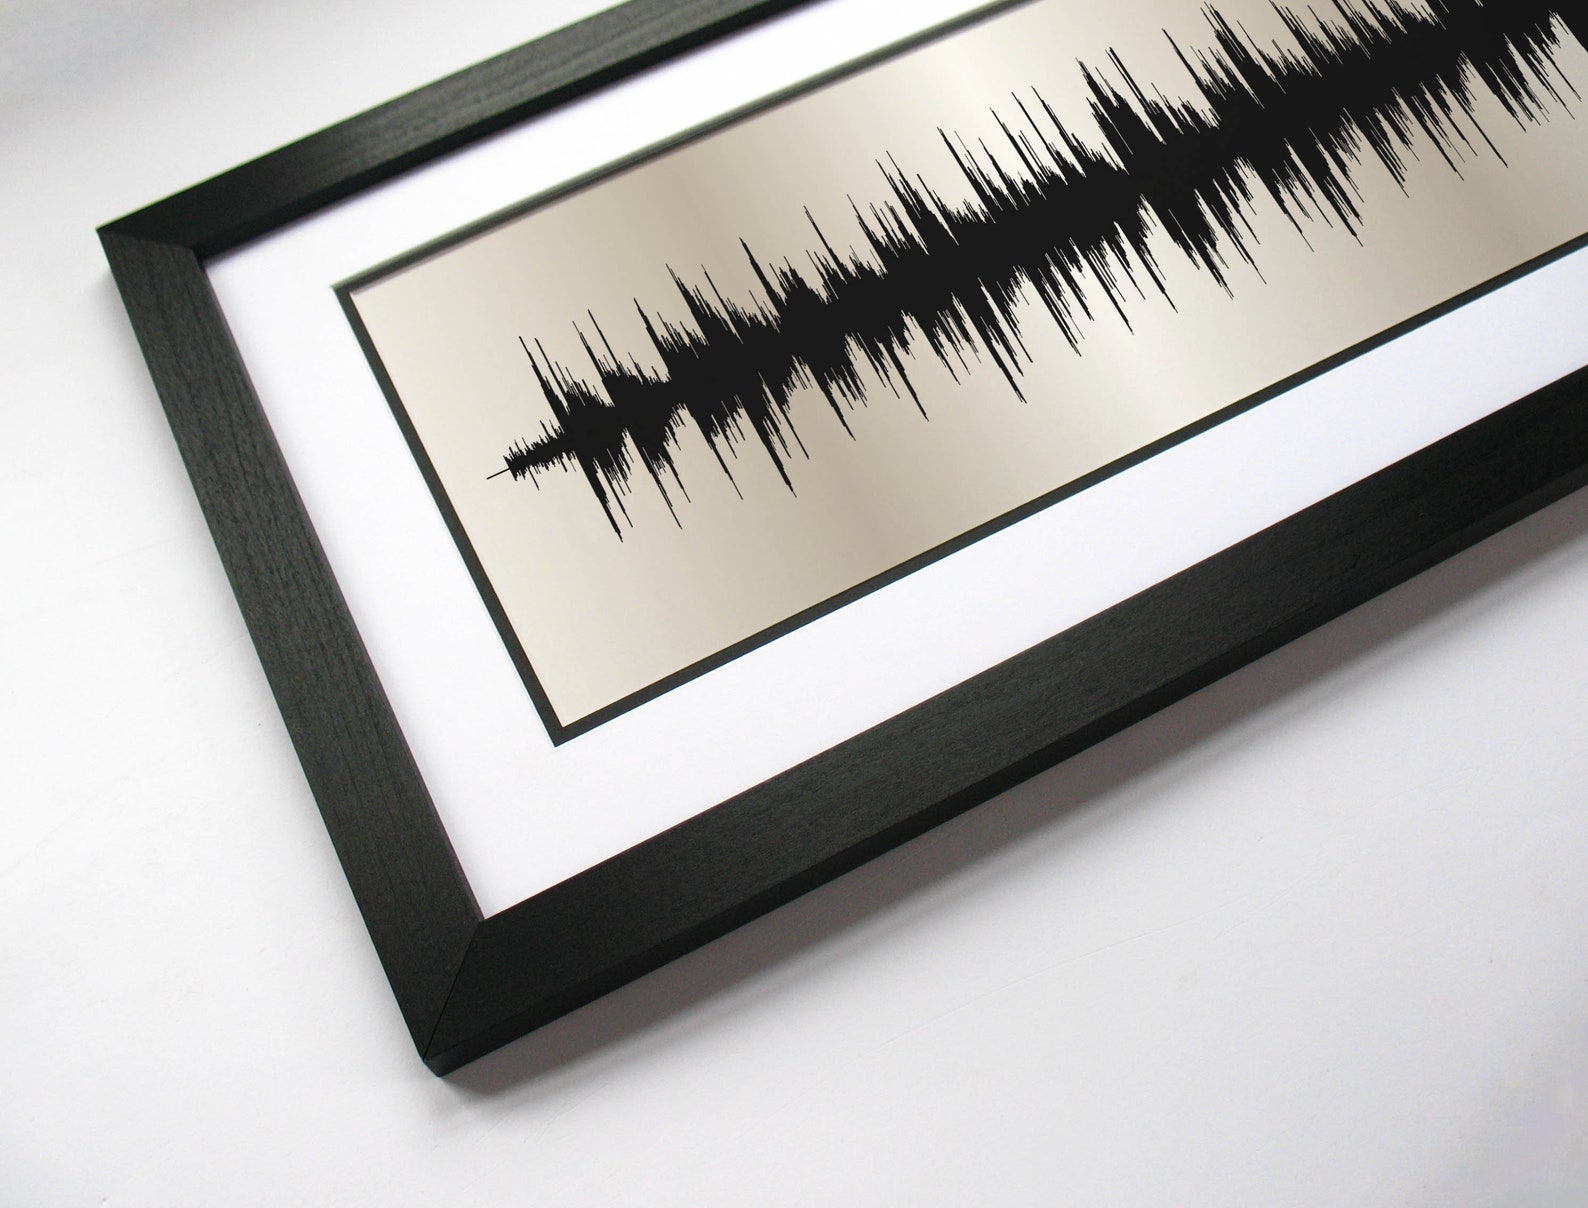 Wedding Song Sound Wave Art - anniversary gift for parents